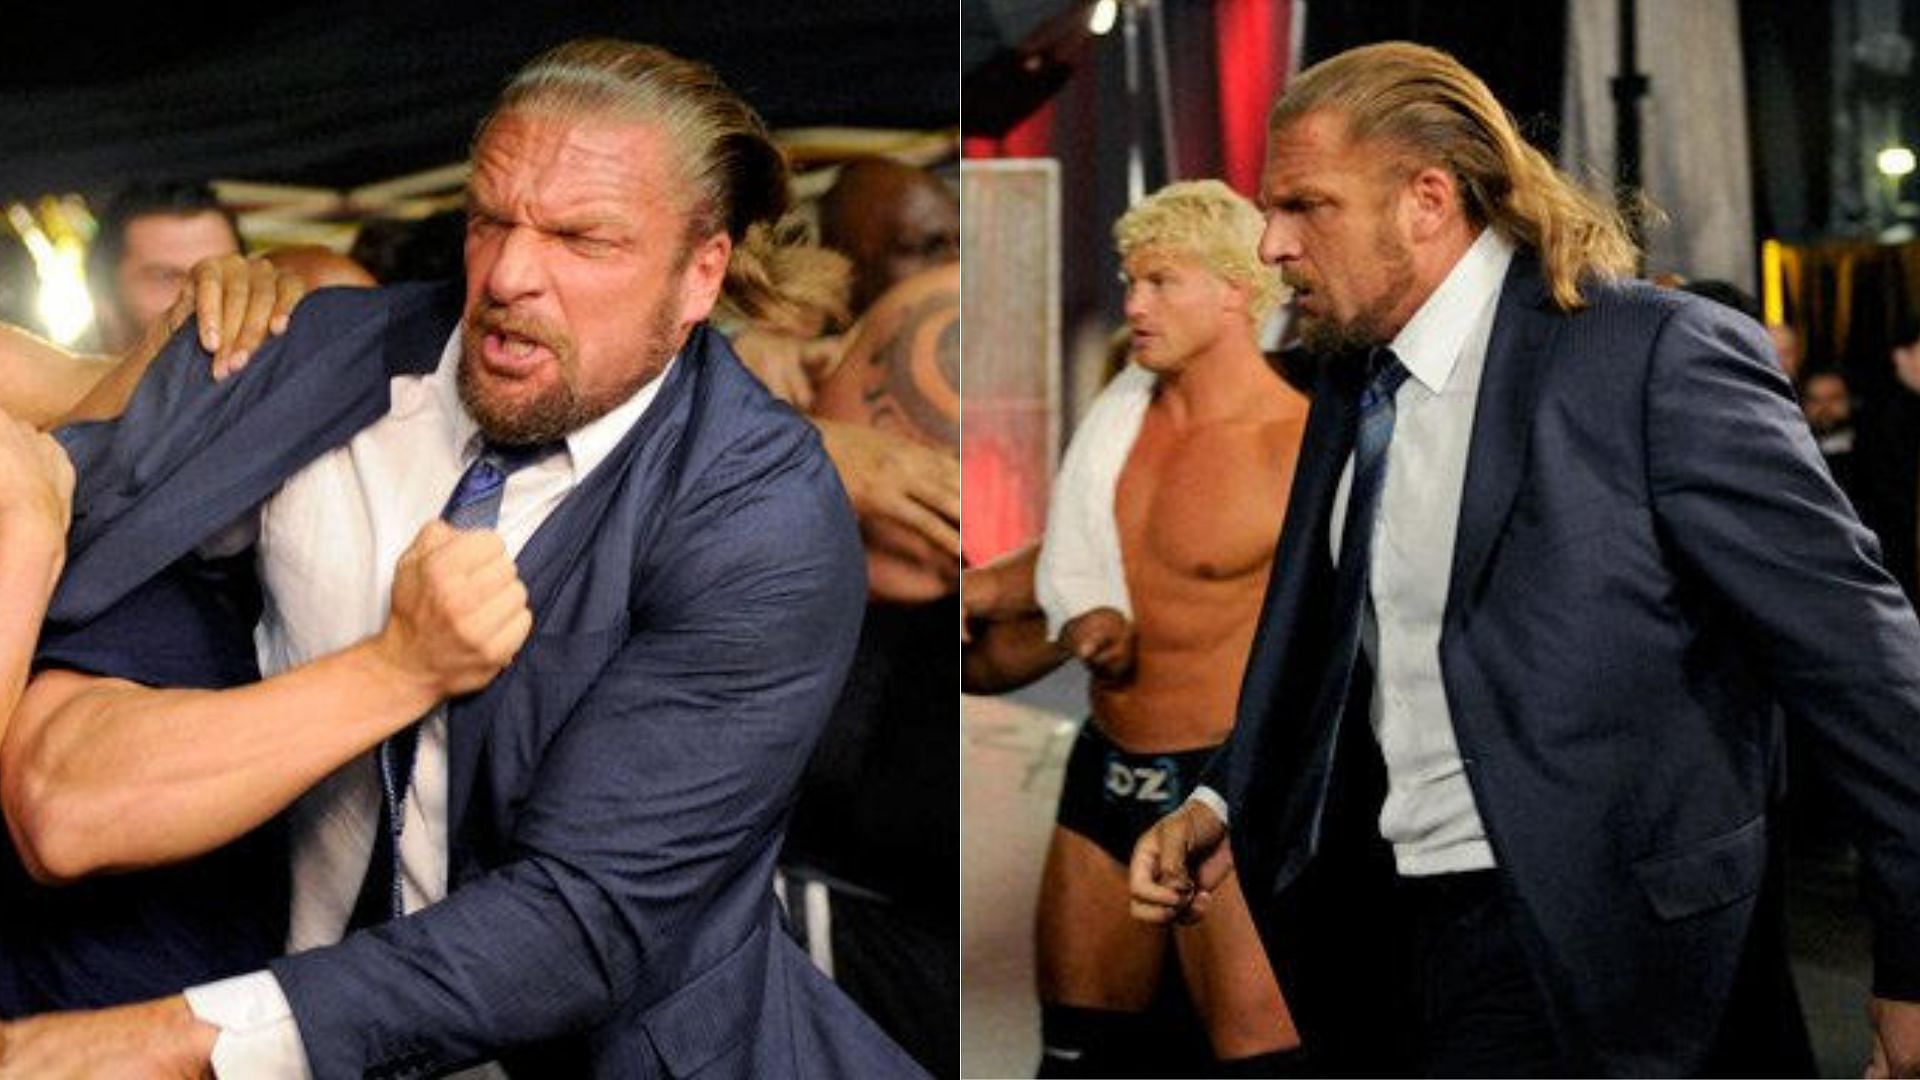 WWE Chief Content Officer Triple H